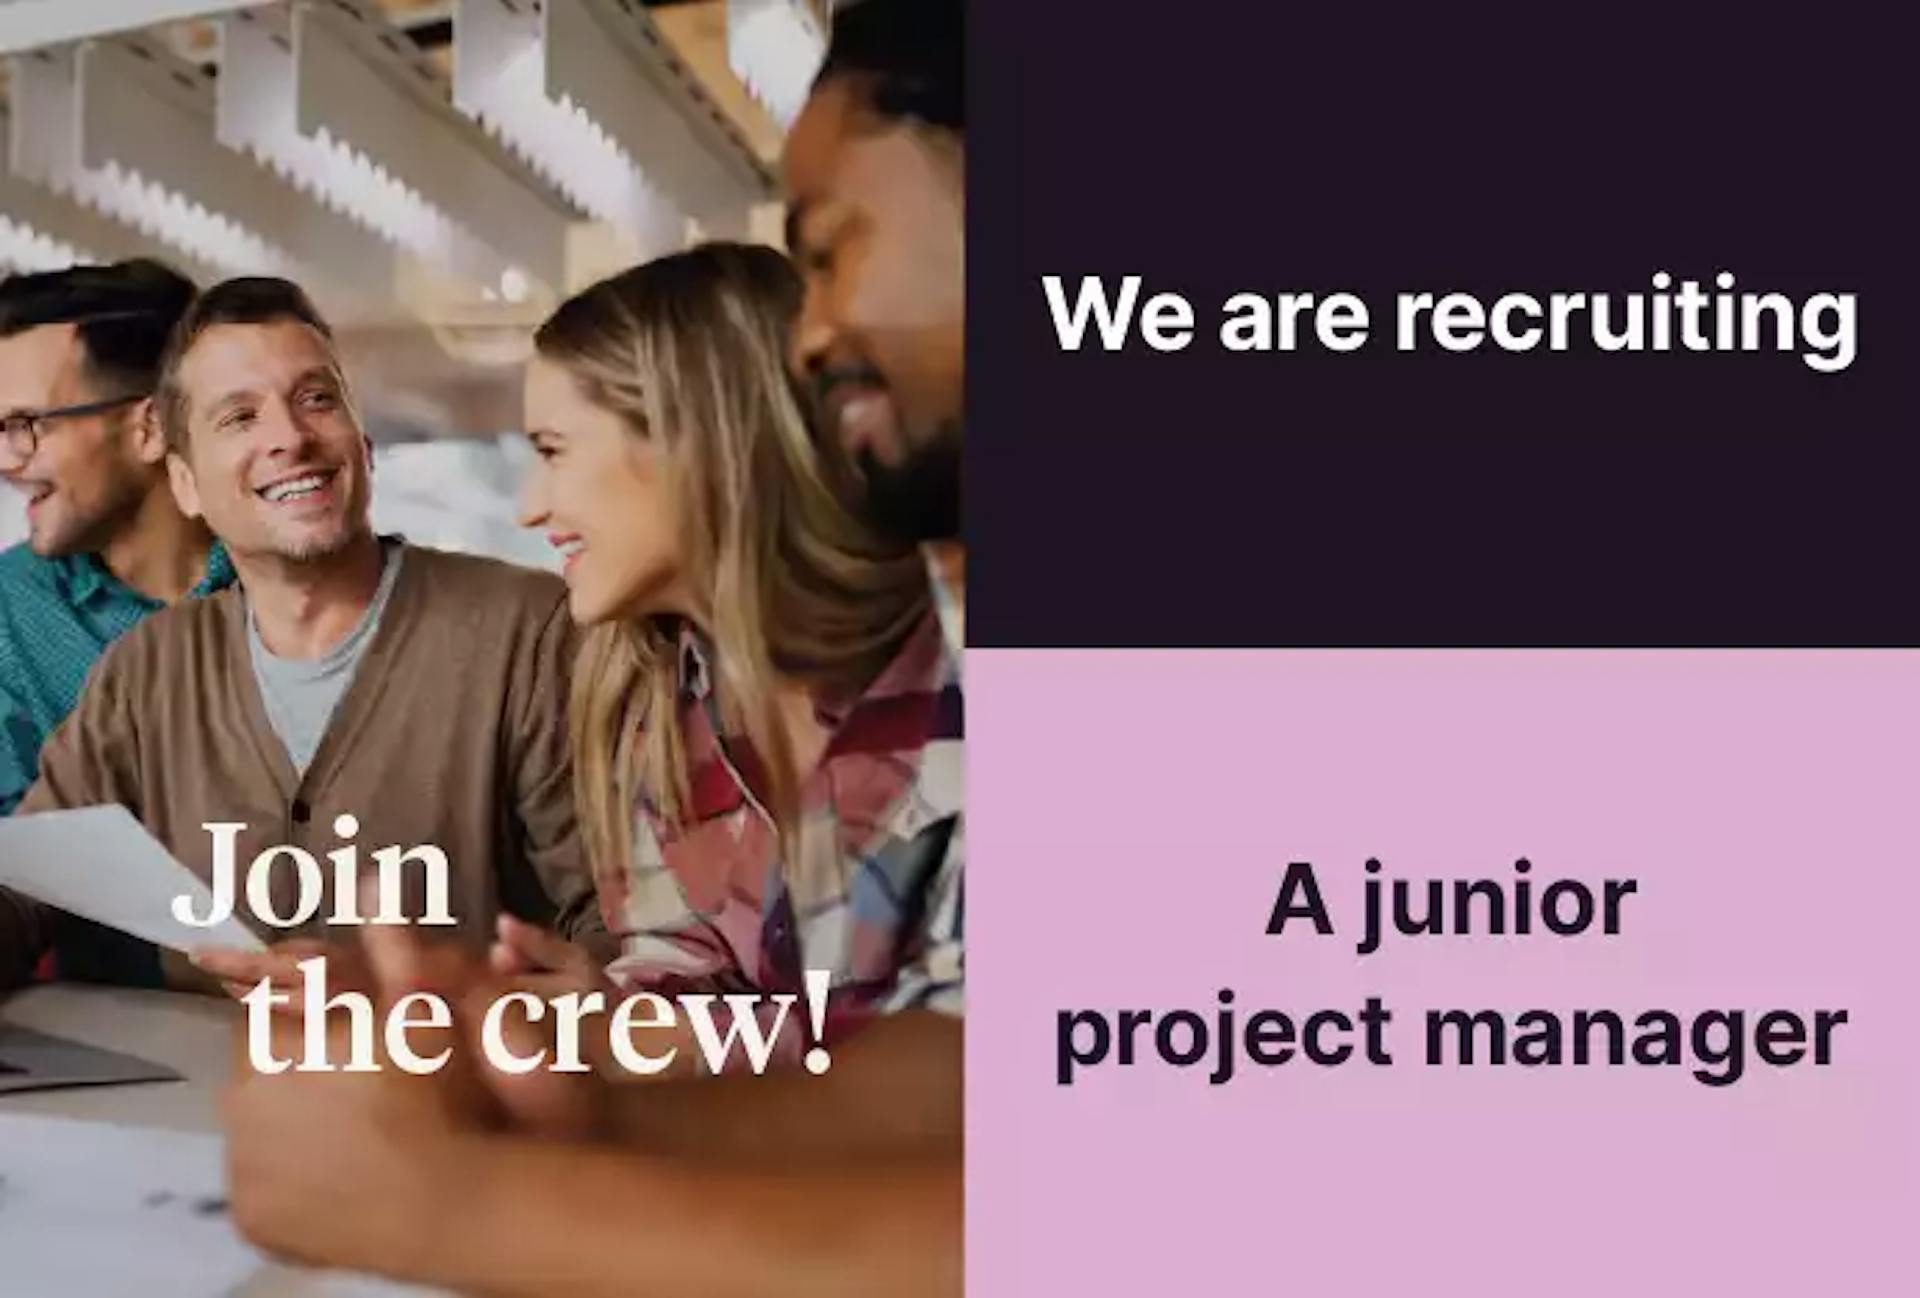 Recruitment video made with Pitchy